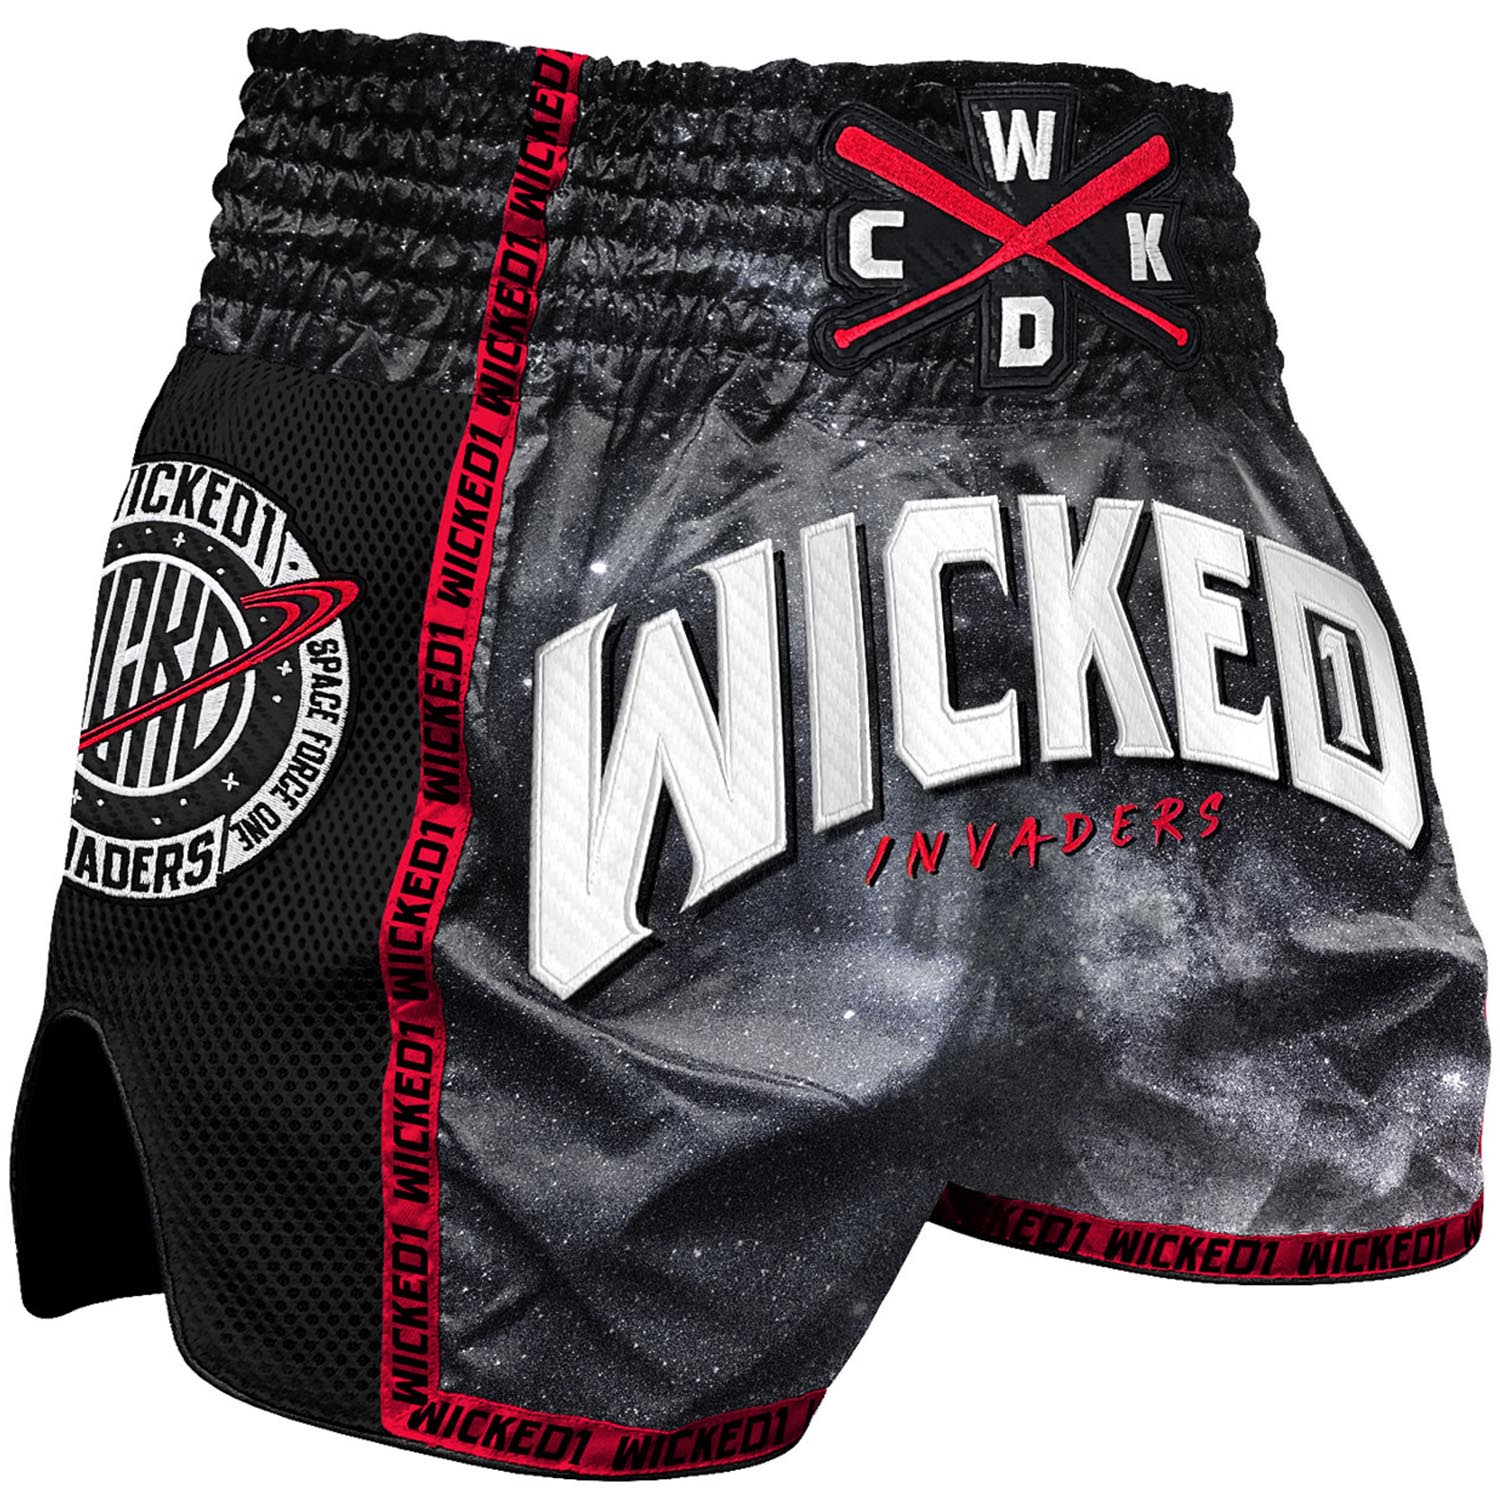 Wicked One Muay Thai Shorts, Invaders, black-red